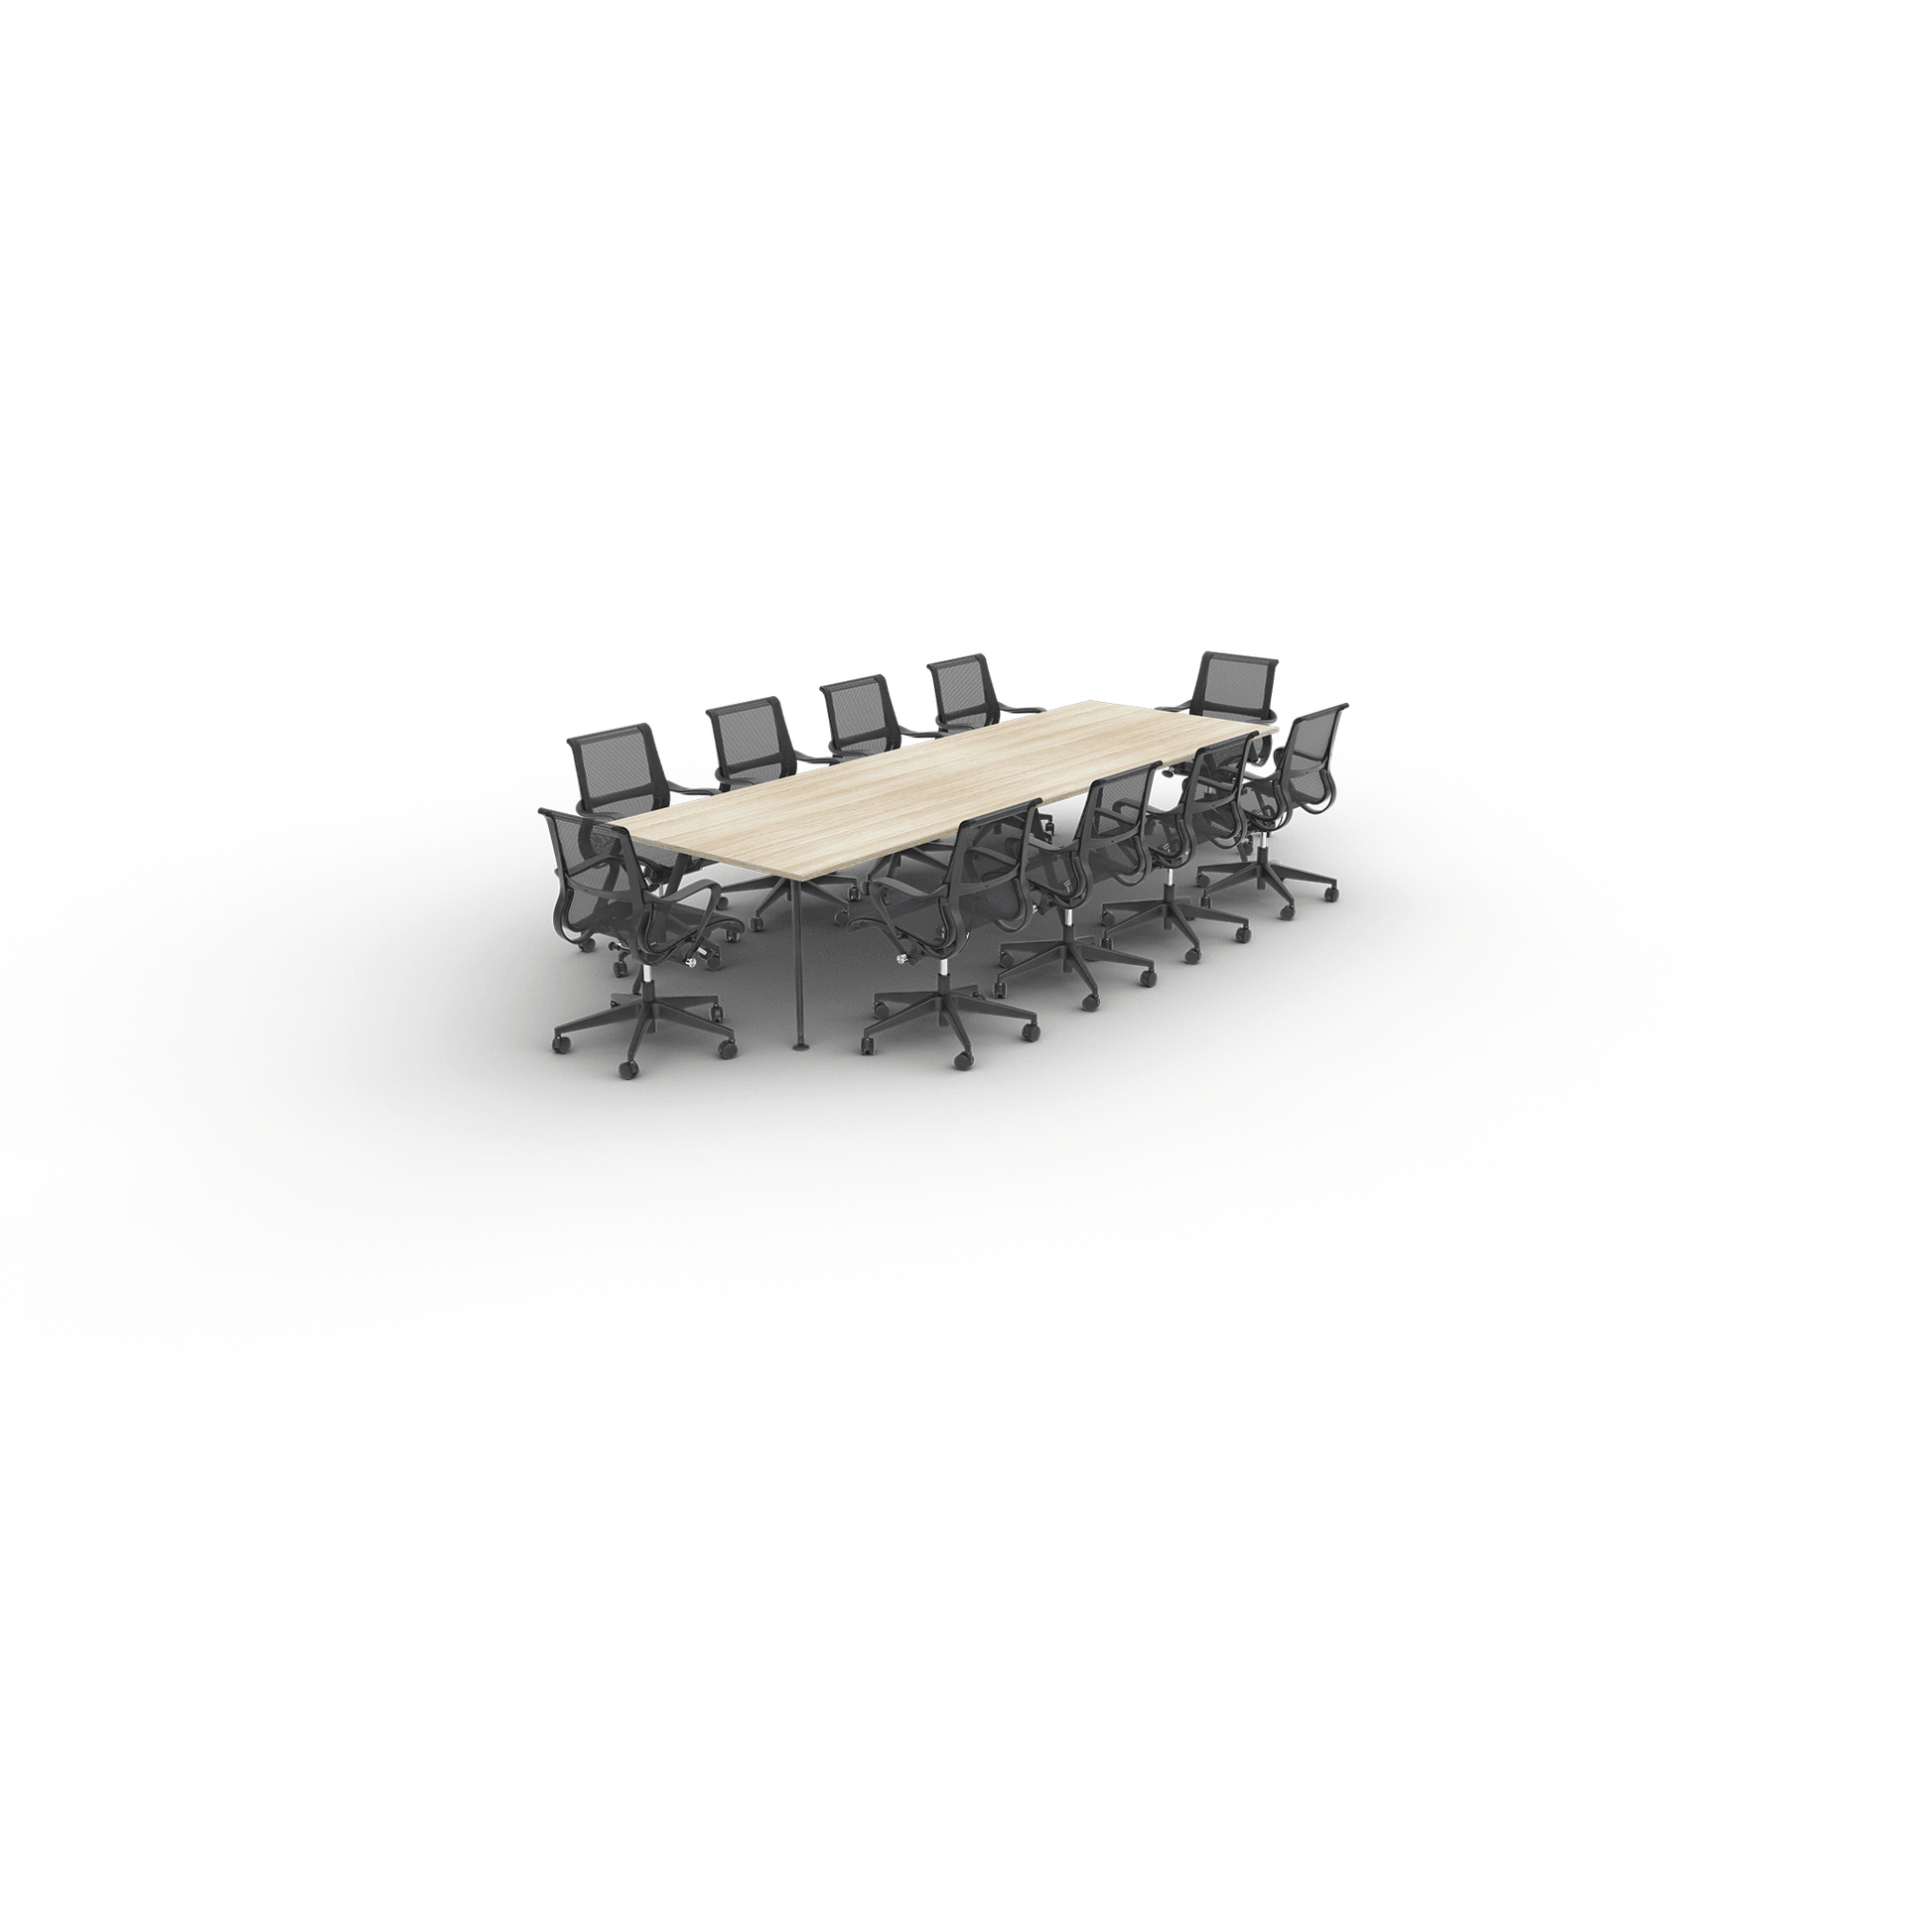 Team Meeting/Boardroom Table - Office Furniture Company 